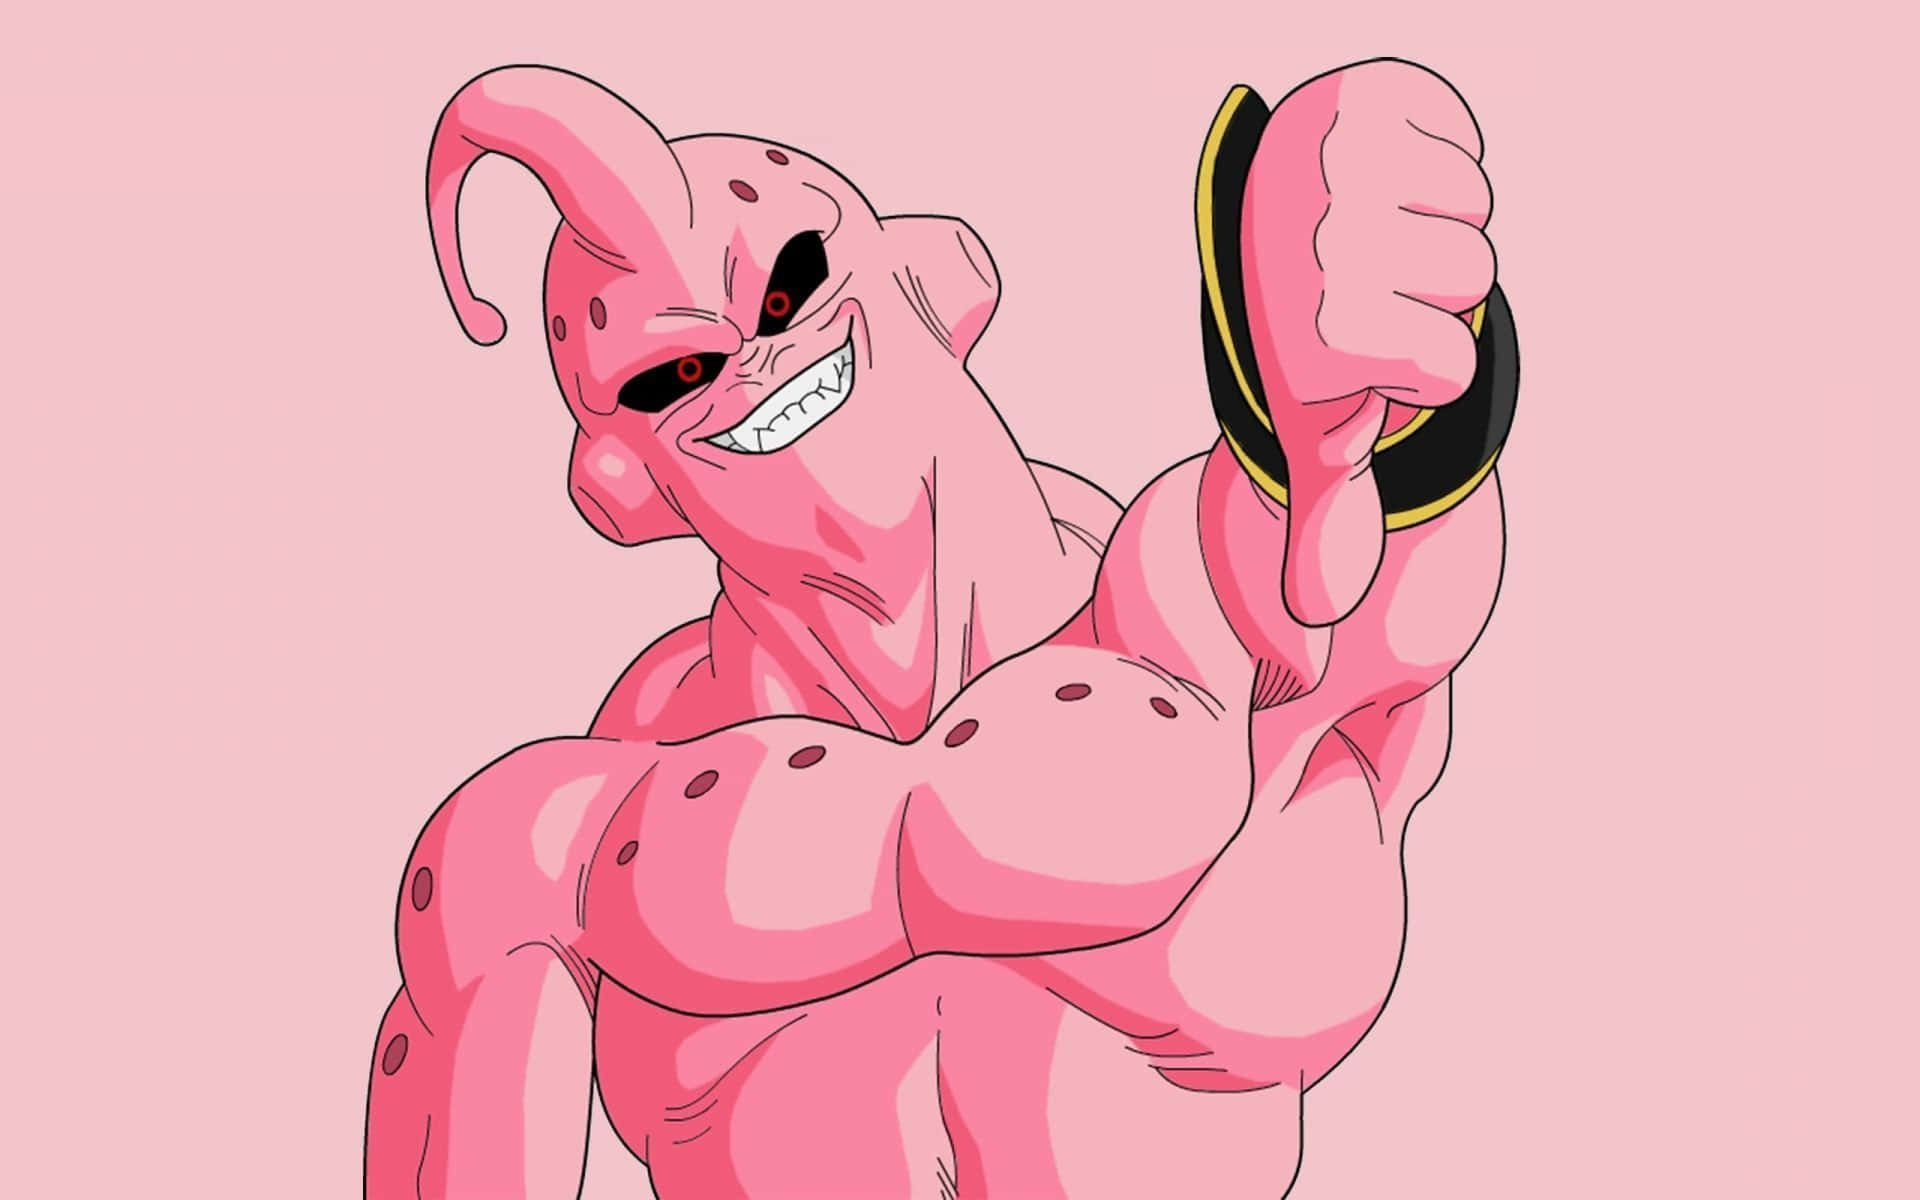 A Pink Dragon Ball Z Character Is Holding Up A Pink Hand Wallpaper